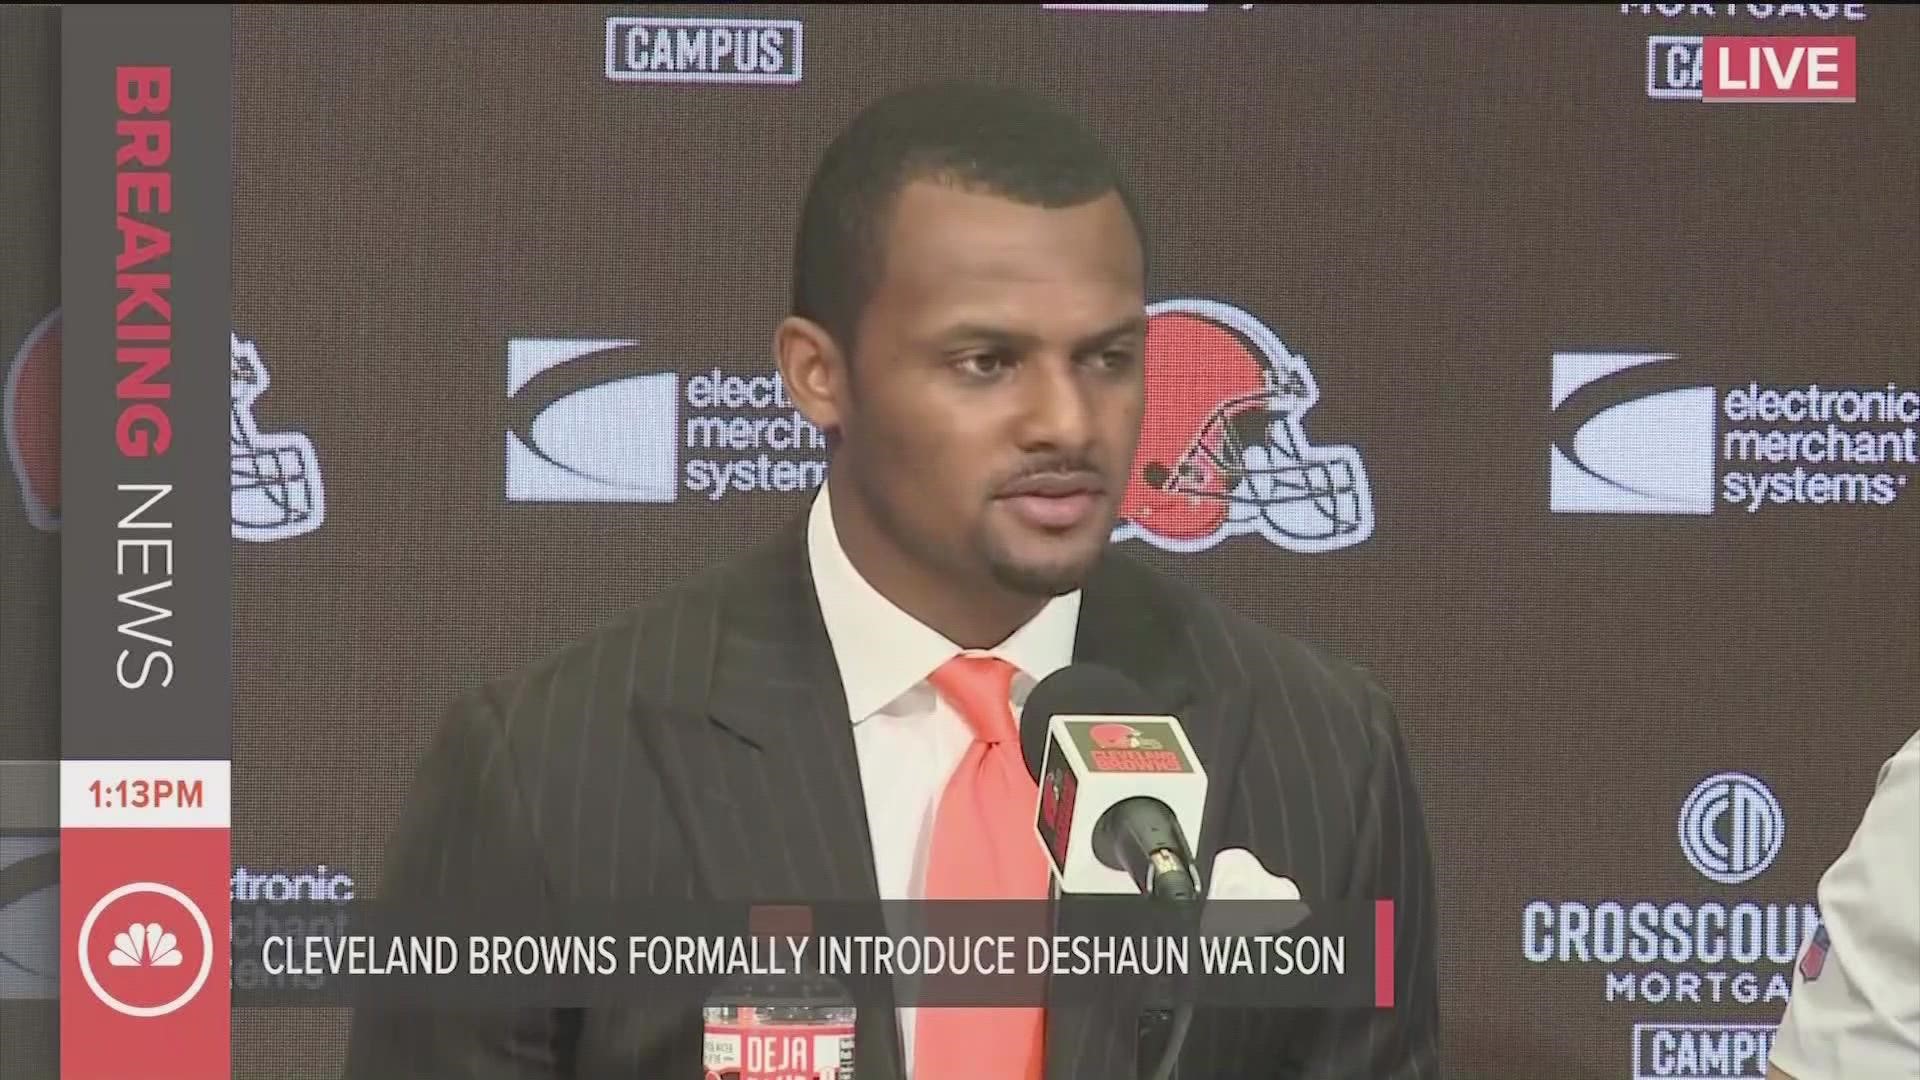 Deshaun Watson answered some tough questions during his introduction as the new Cleveland Browns quarterback.